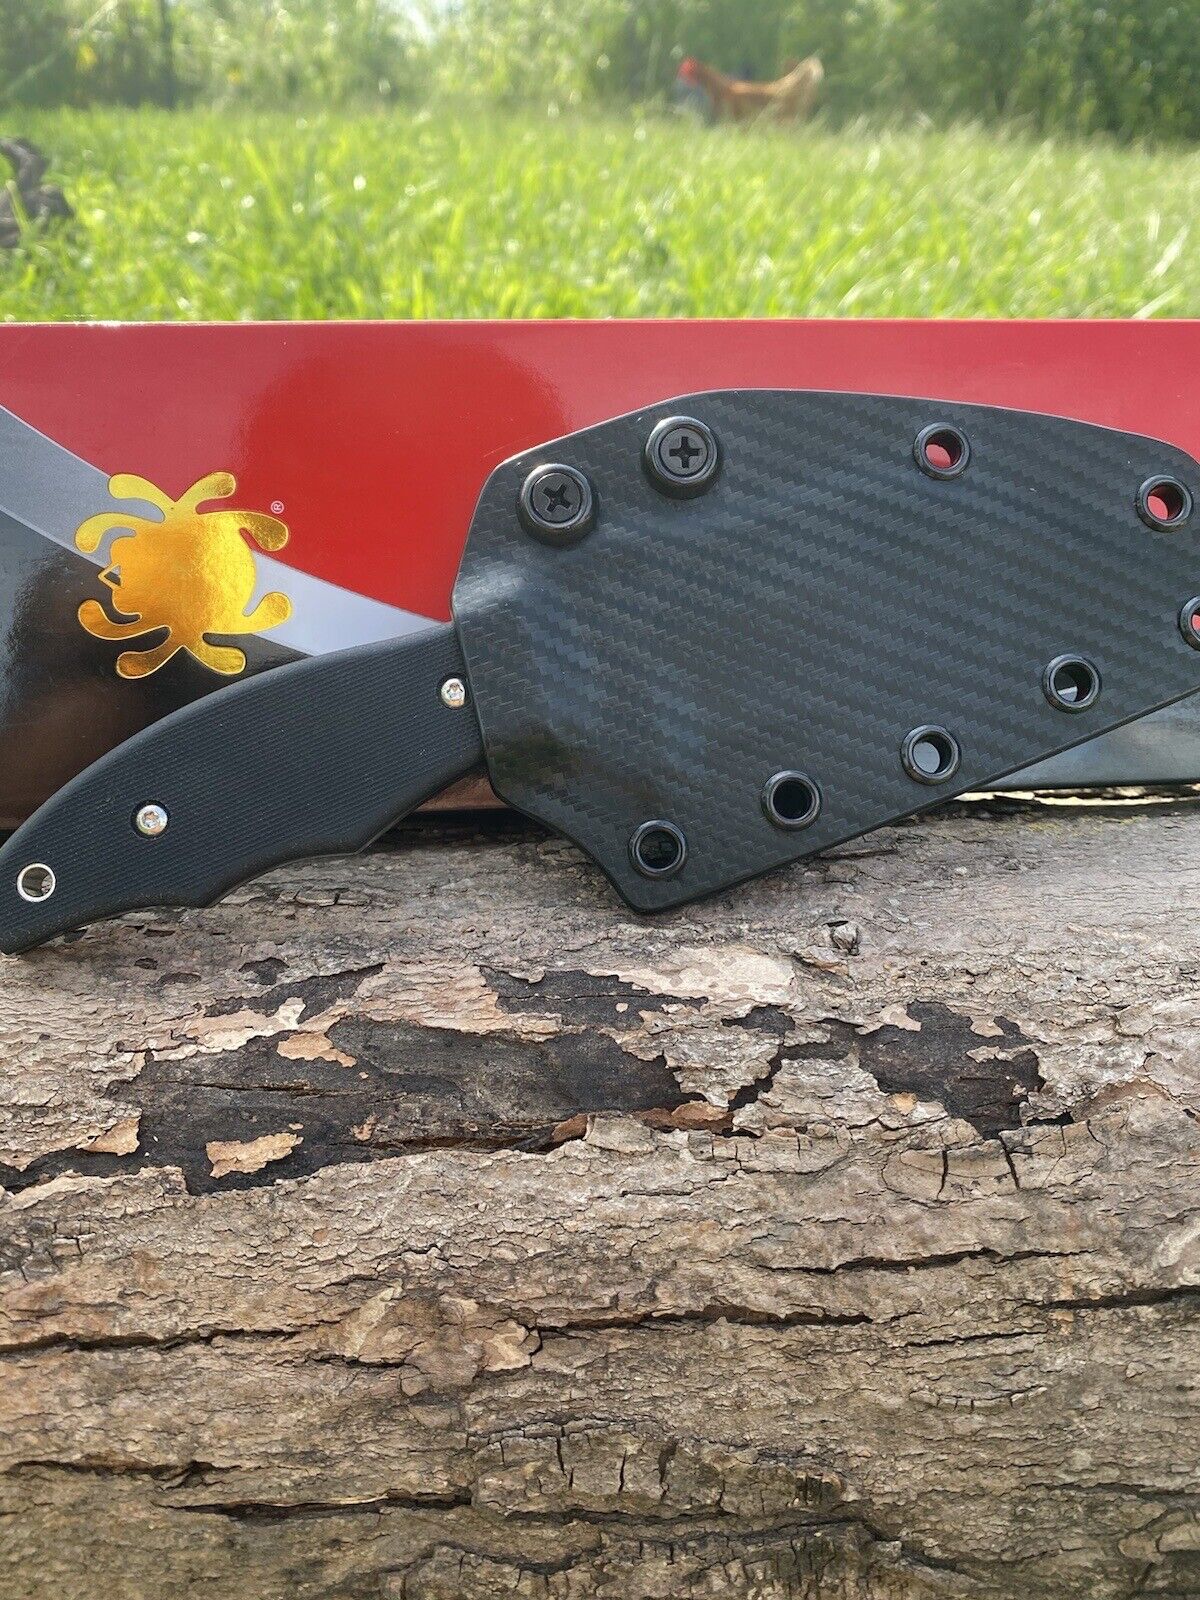 Spyderco Ronin 2 Horizontal Carry Kydex Sheath (Knife Not Inlcuded)